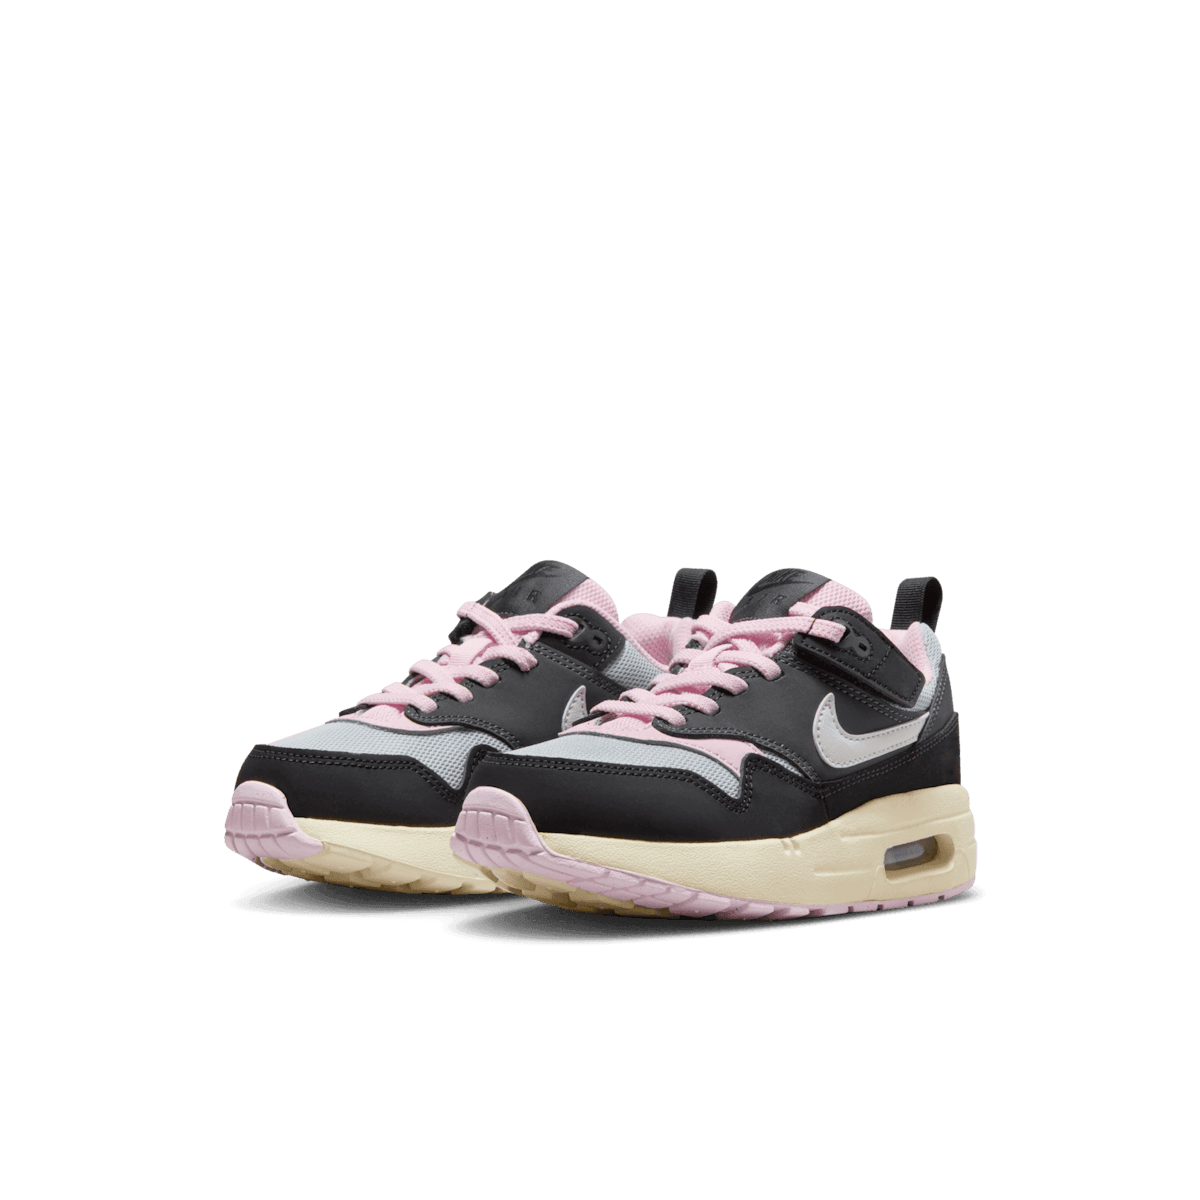 Nike Air Max 1 Black Anthracite Pink Foam (PS) Angle 2